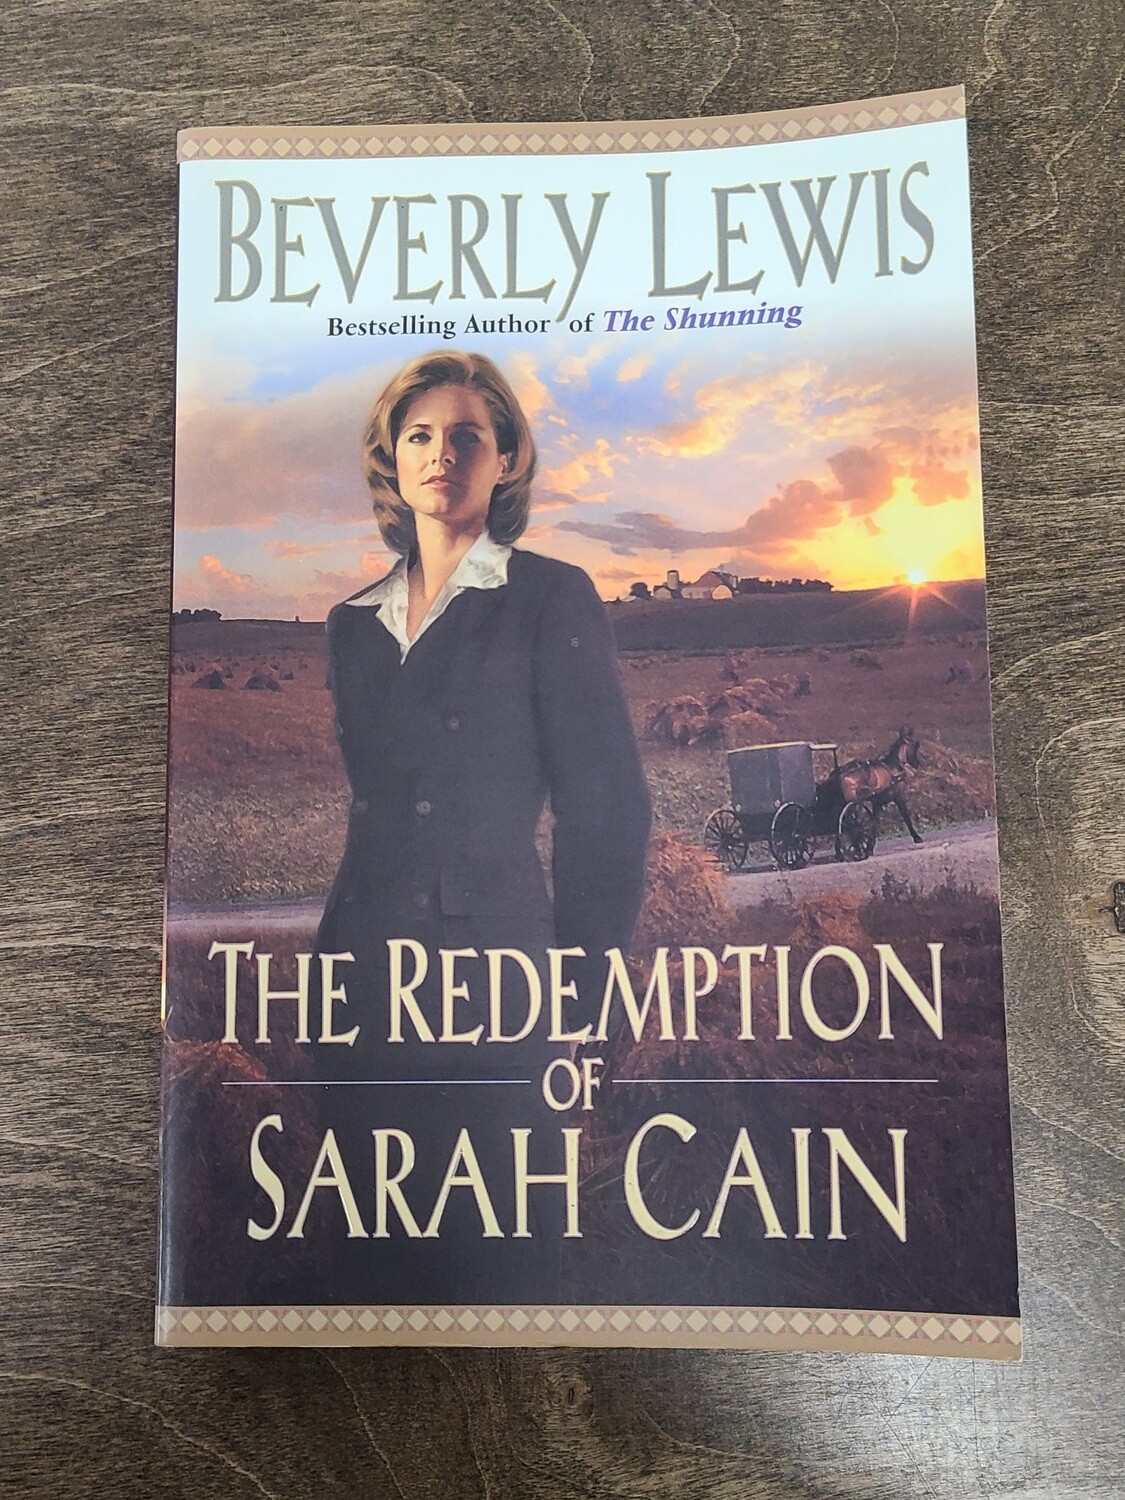 The Redemption of Sarah Cain by Beverly Lewis